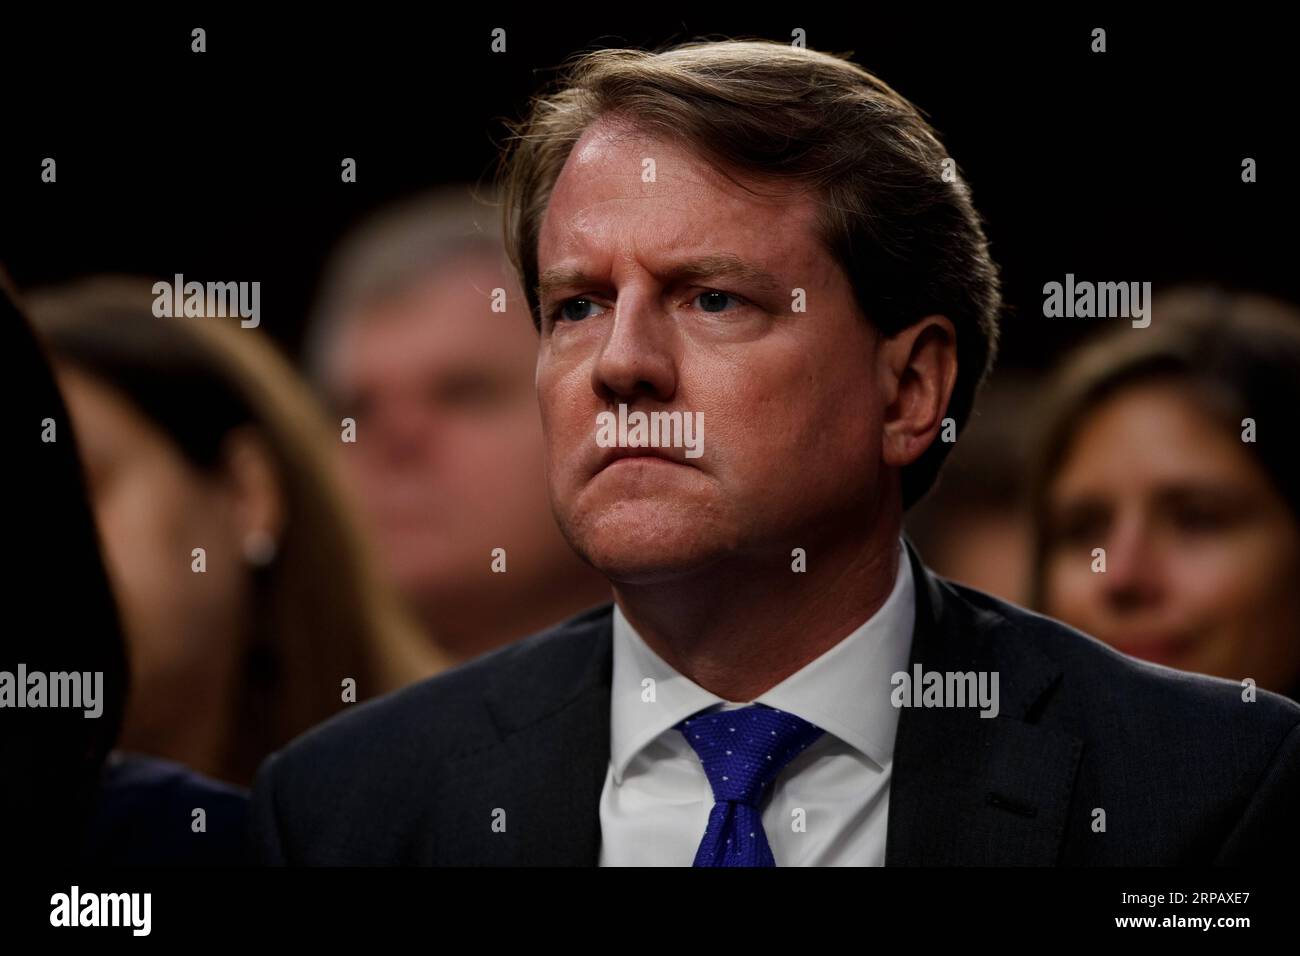 (190521) -- WASHINGTON D.C., May 21, 2019 -- Then White House counsel Don McGahn reacts in the audience during the confirmation hearing for Supreme Court Justice nominee Brett Kavanaugh before the U.S. Senate Judiciary Committee on Capitol Hill in Washington D.C., the United States, on Sept. 4, 2018. The White House on Monday instructed former counsel Don McGahn to defy a congressional subpoena and skip a hearing scheduled for Tuesday relating to the Russia probe. ) U.S.-WASHINGTON D.C.-DON MCGAHN-SUBPOENA TingxShen PUBLICATIONxNOTxINxCHN Stock Photo